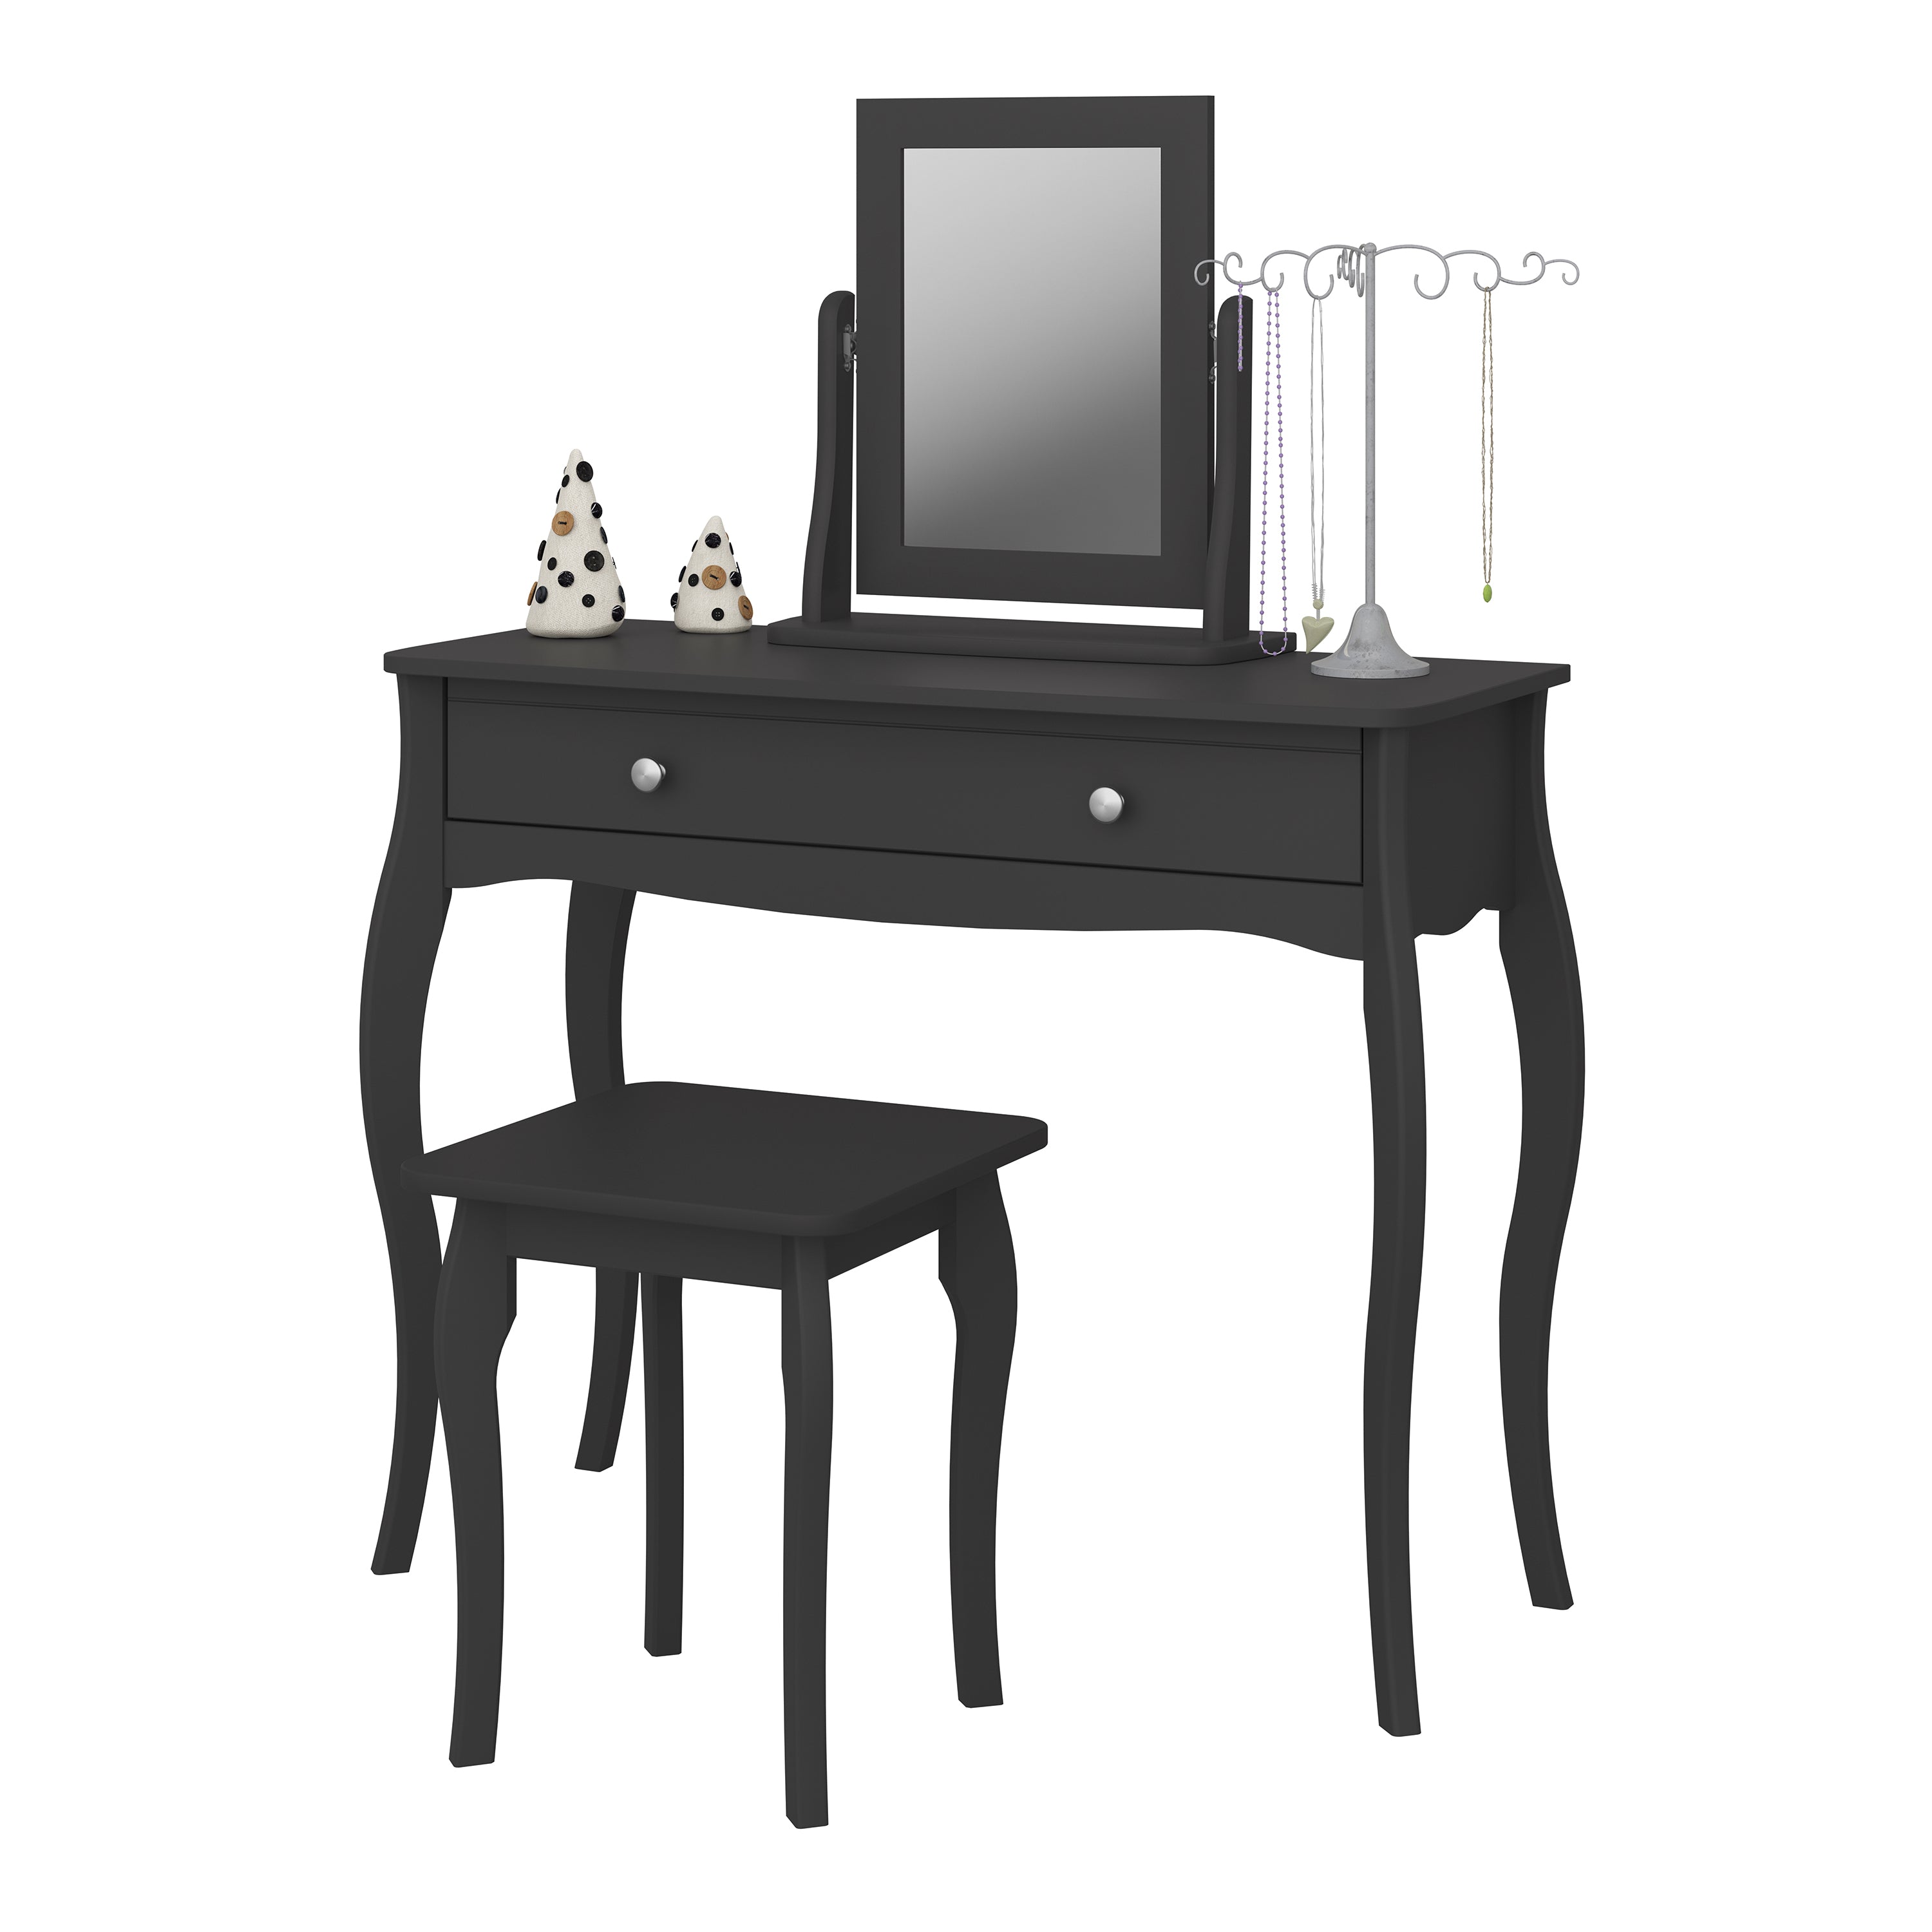 Baroque 1 Drw Vanity included Stool and Mirror Black